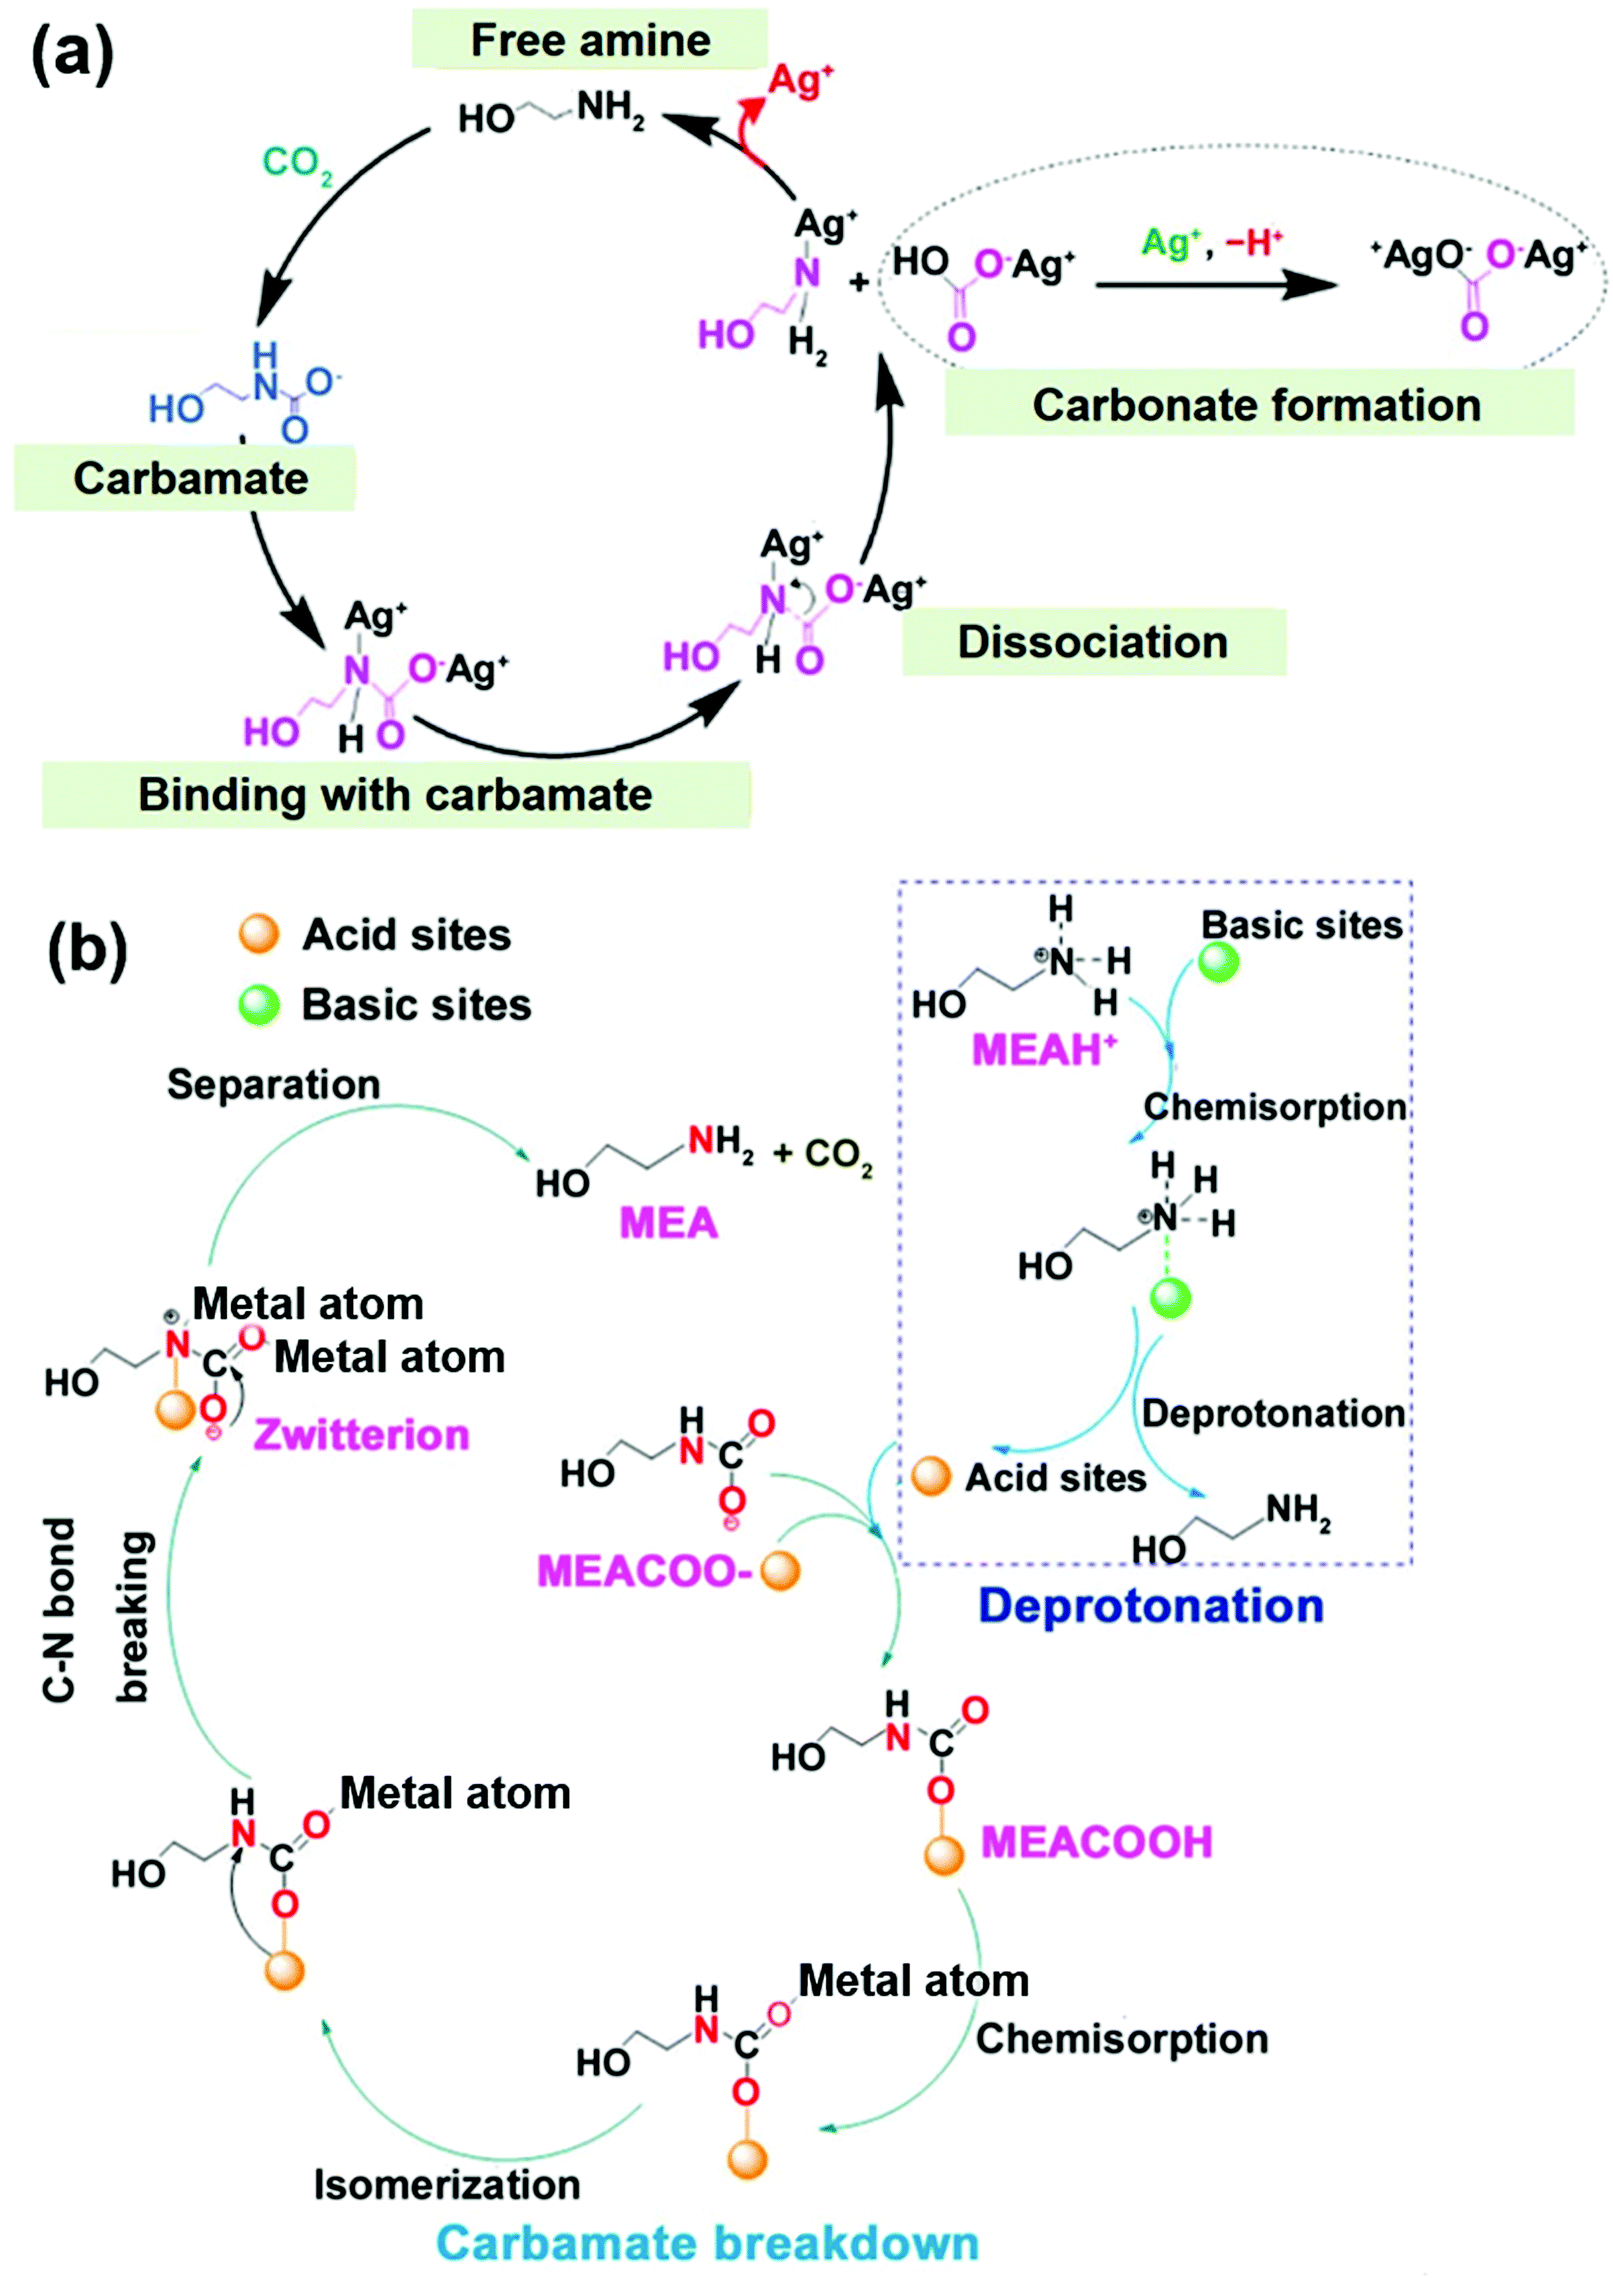 Industrial carbon dioxide capture and utilization: state of the art and  future challenges - Chemical Society Reviews (RSC Publishing)  DOI:10.1039/D0CS00025F